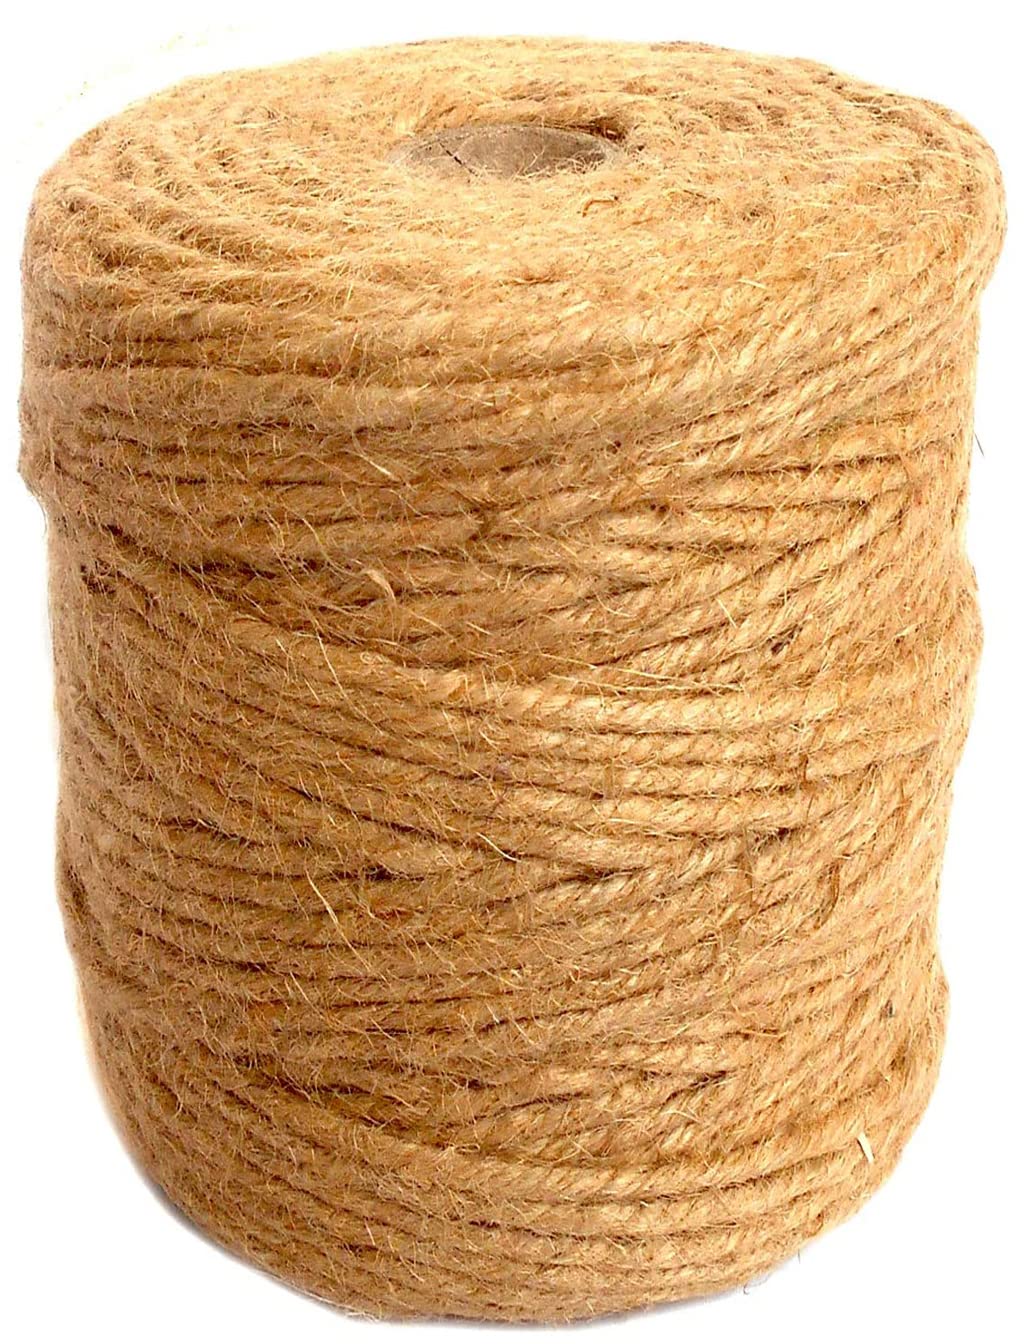 PREMIFY Natural Jute Twine, 100m/330 Feet Brown Thick Jute Rope. 3mm/4Ply Jute String for Floristry, DIY Arts & Crafts, Gifts Wrapping, Decoration, Bundling, Garden & Recycling